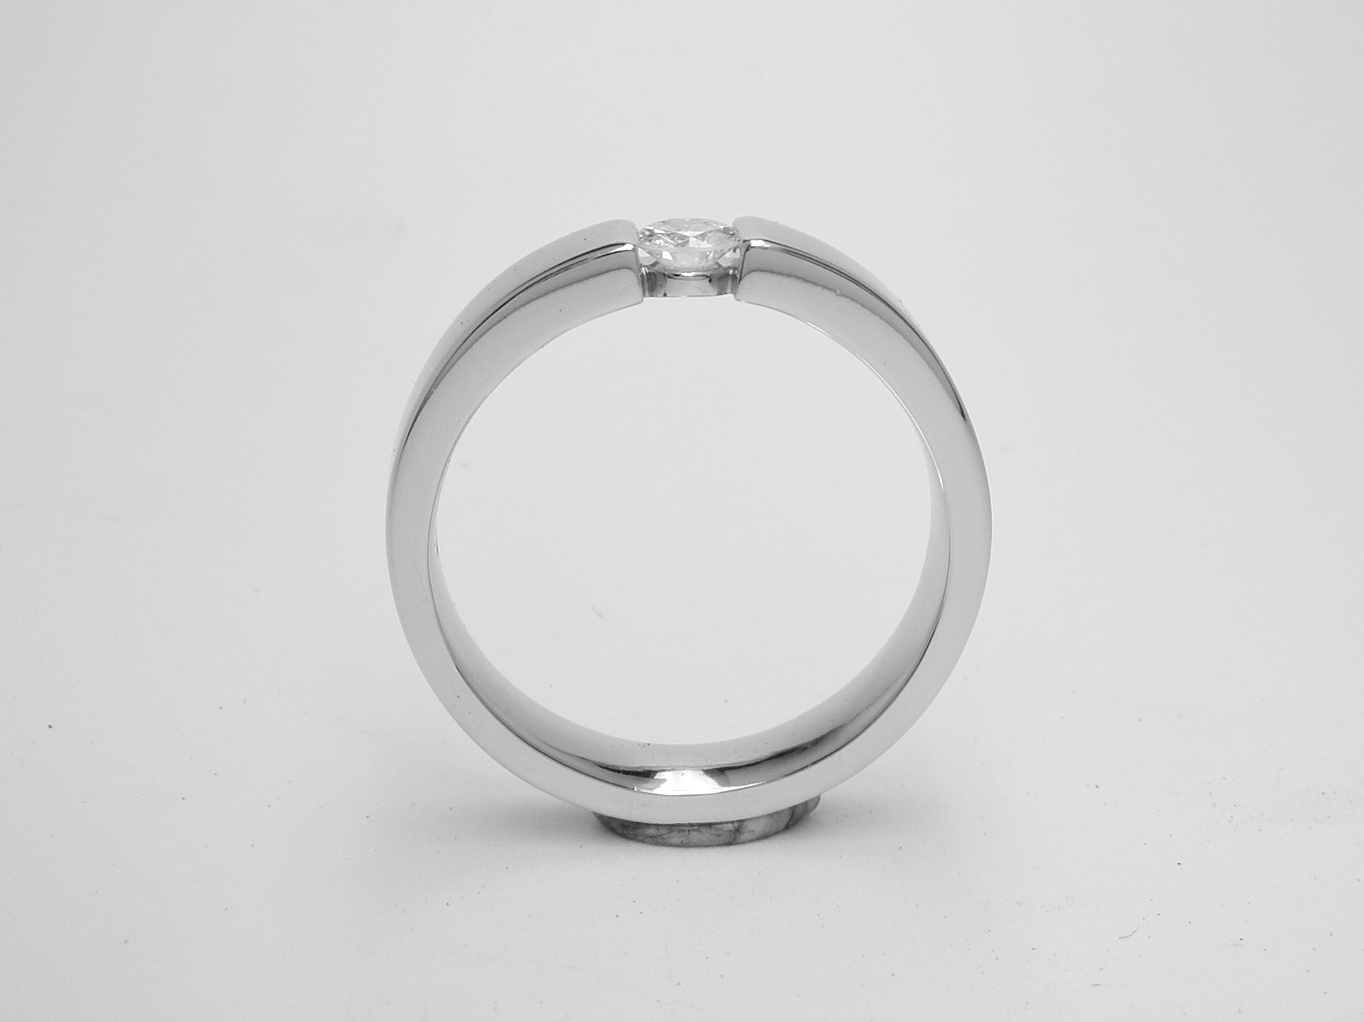 A single stone round brilliant cut diamond ring styled with the illusion of being tension set and mounted in platinum.